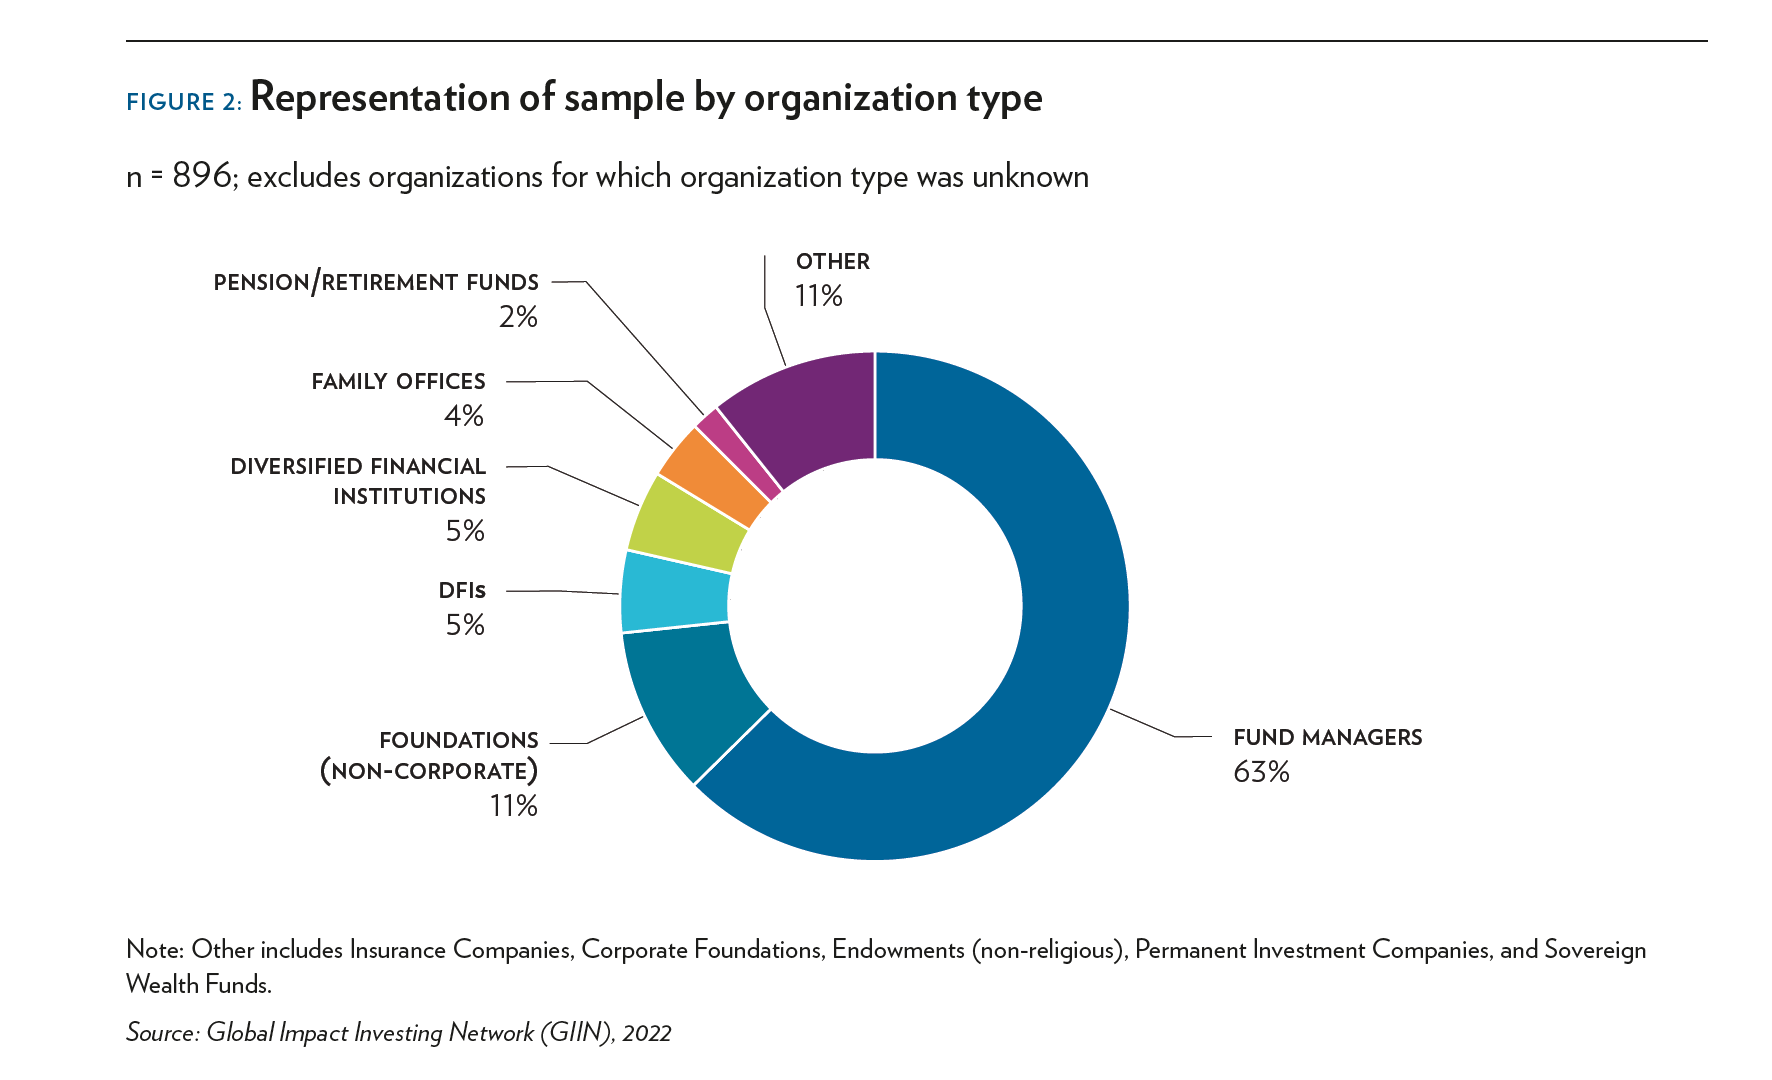 pie chart showing representation of sample by organisation type: fund managers 63%, non corporate foundations 11%, DFIs 5%, Diversified financial institutions 5%, family offices 4%, pension/retirement funds 2%, other 11%